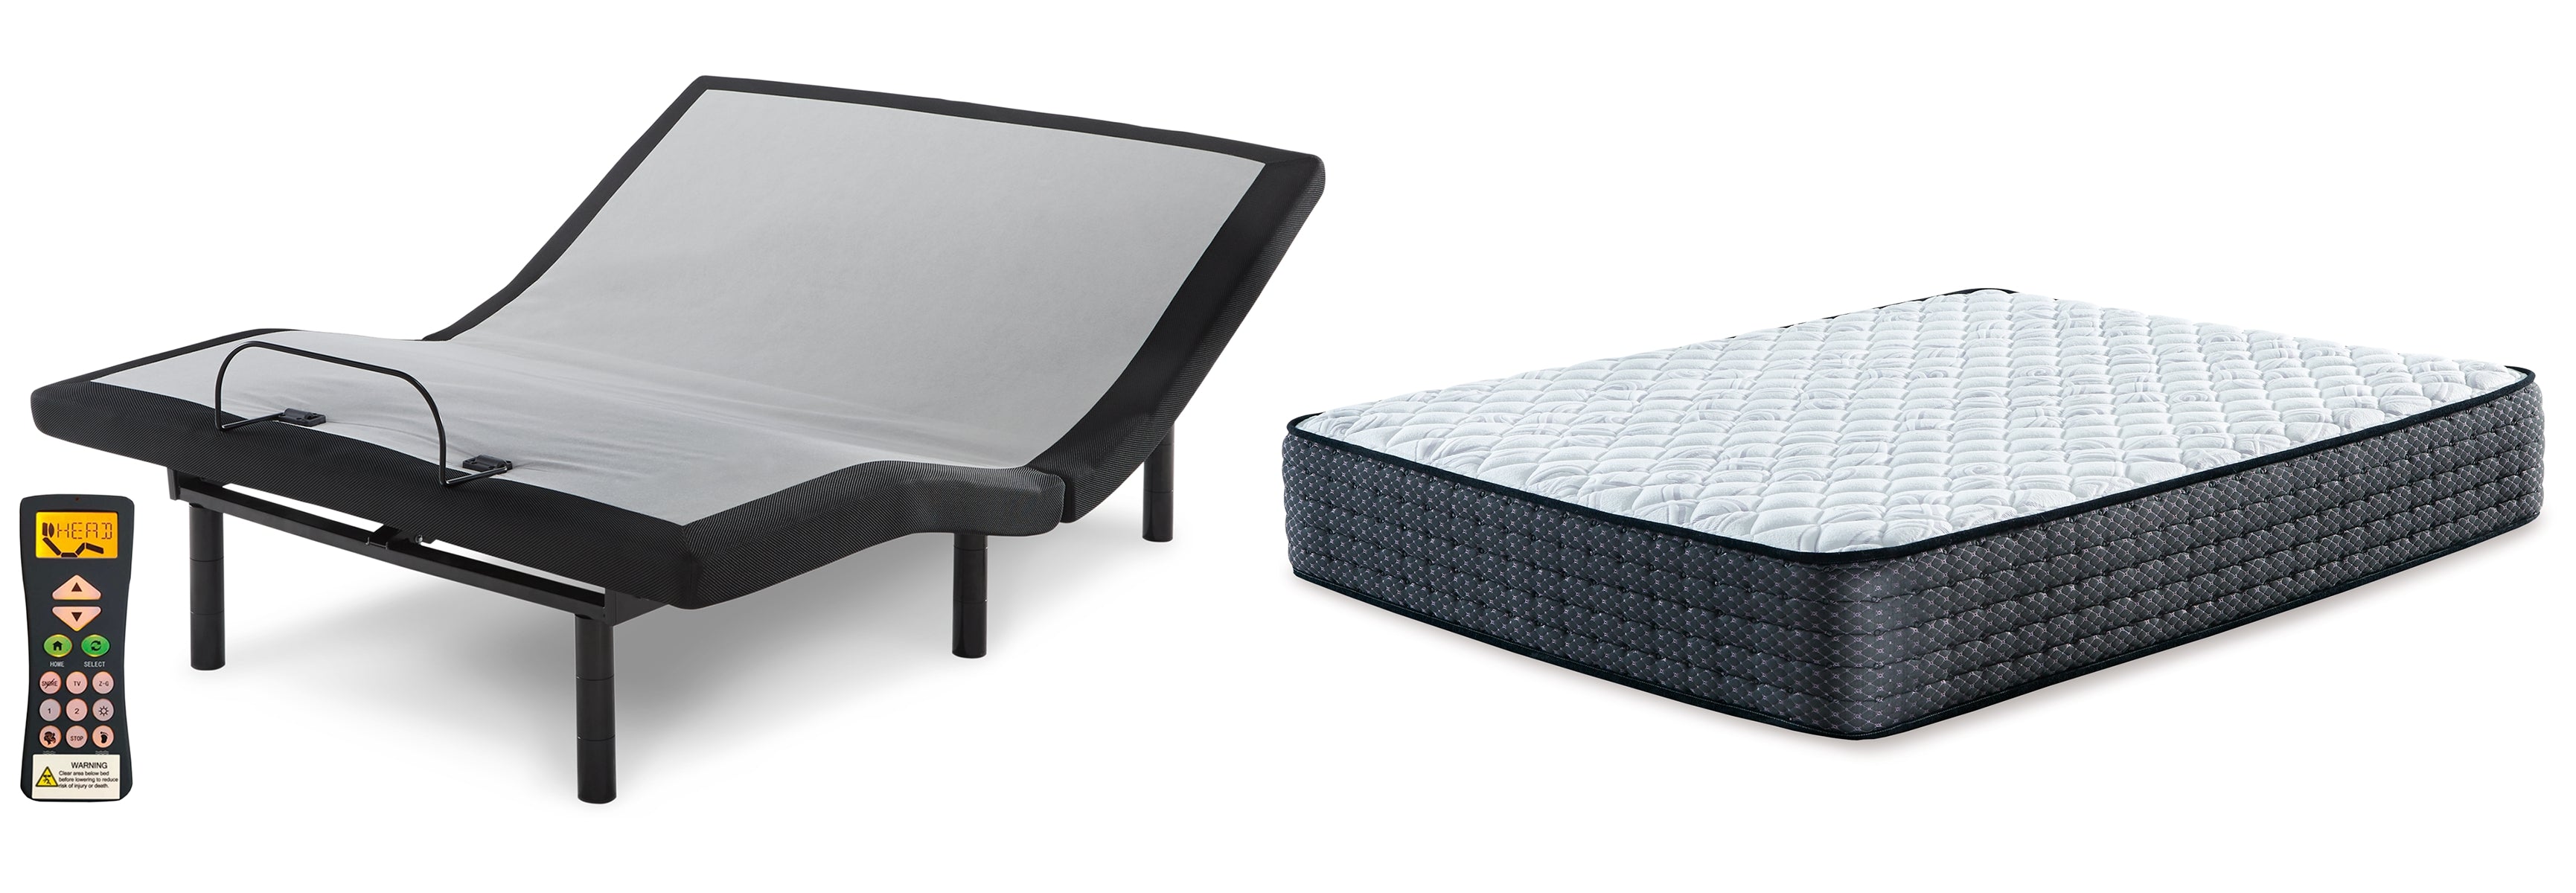 Limited Edition Firm Mattress with Adjustable Base